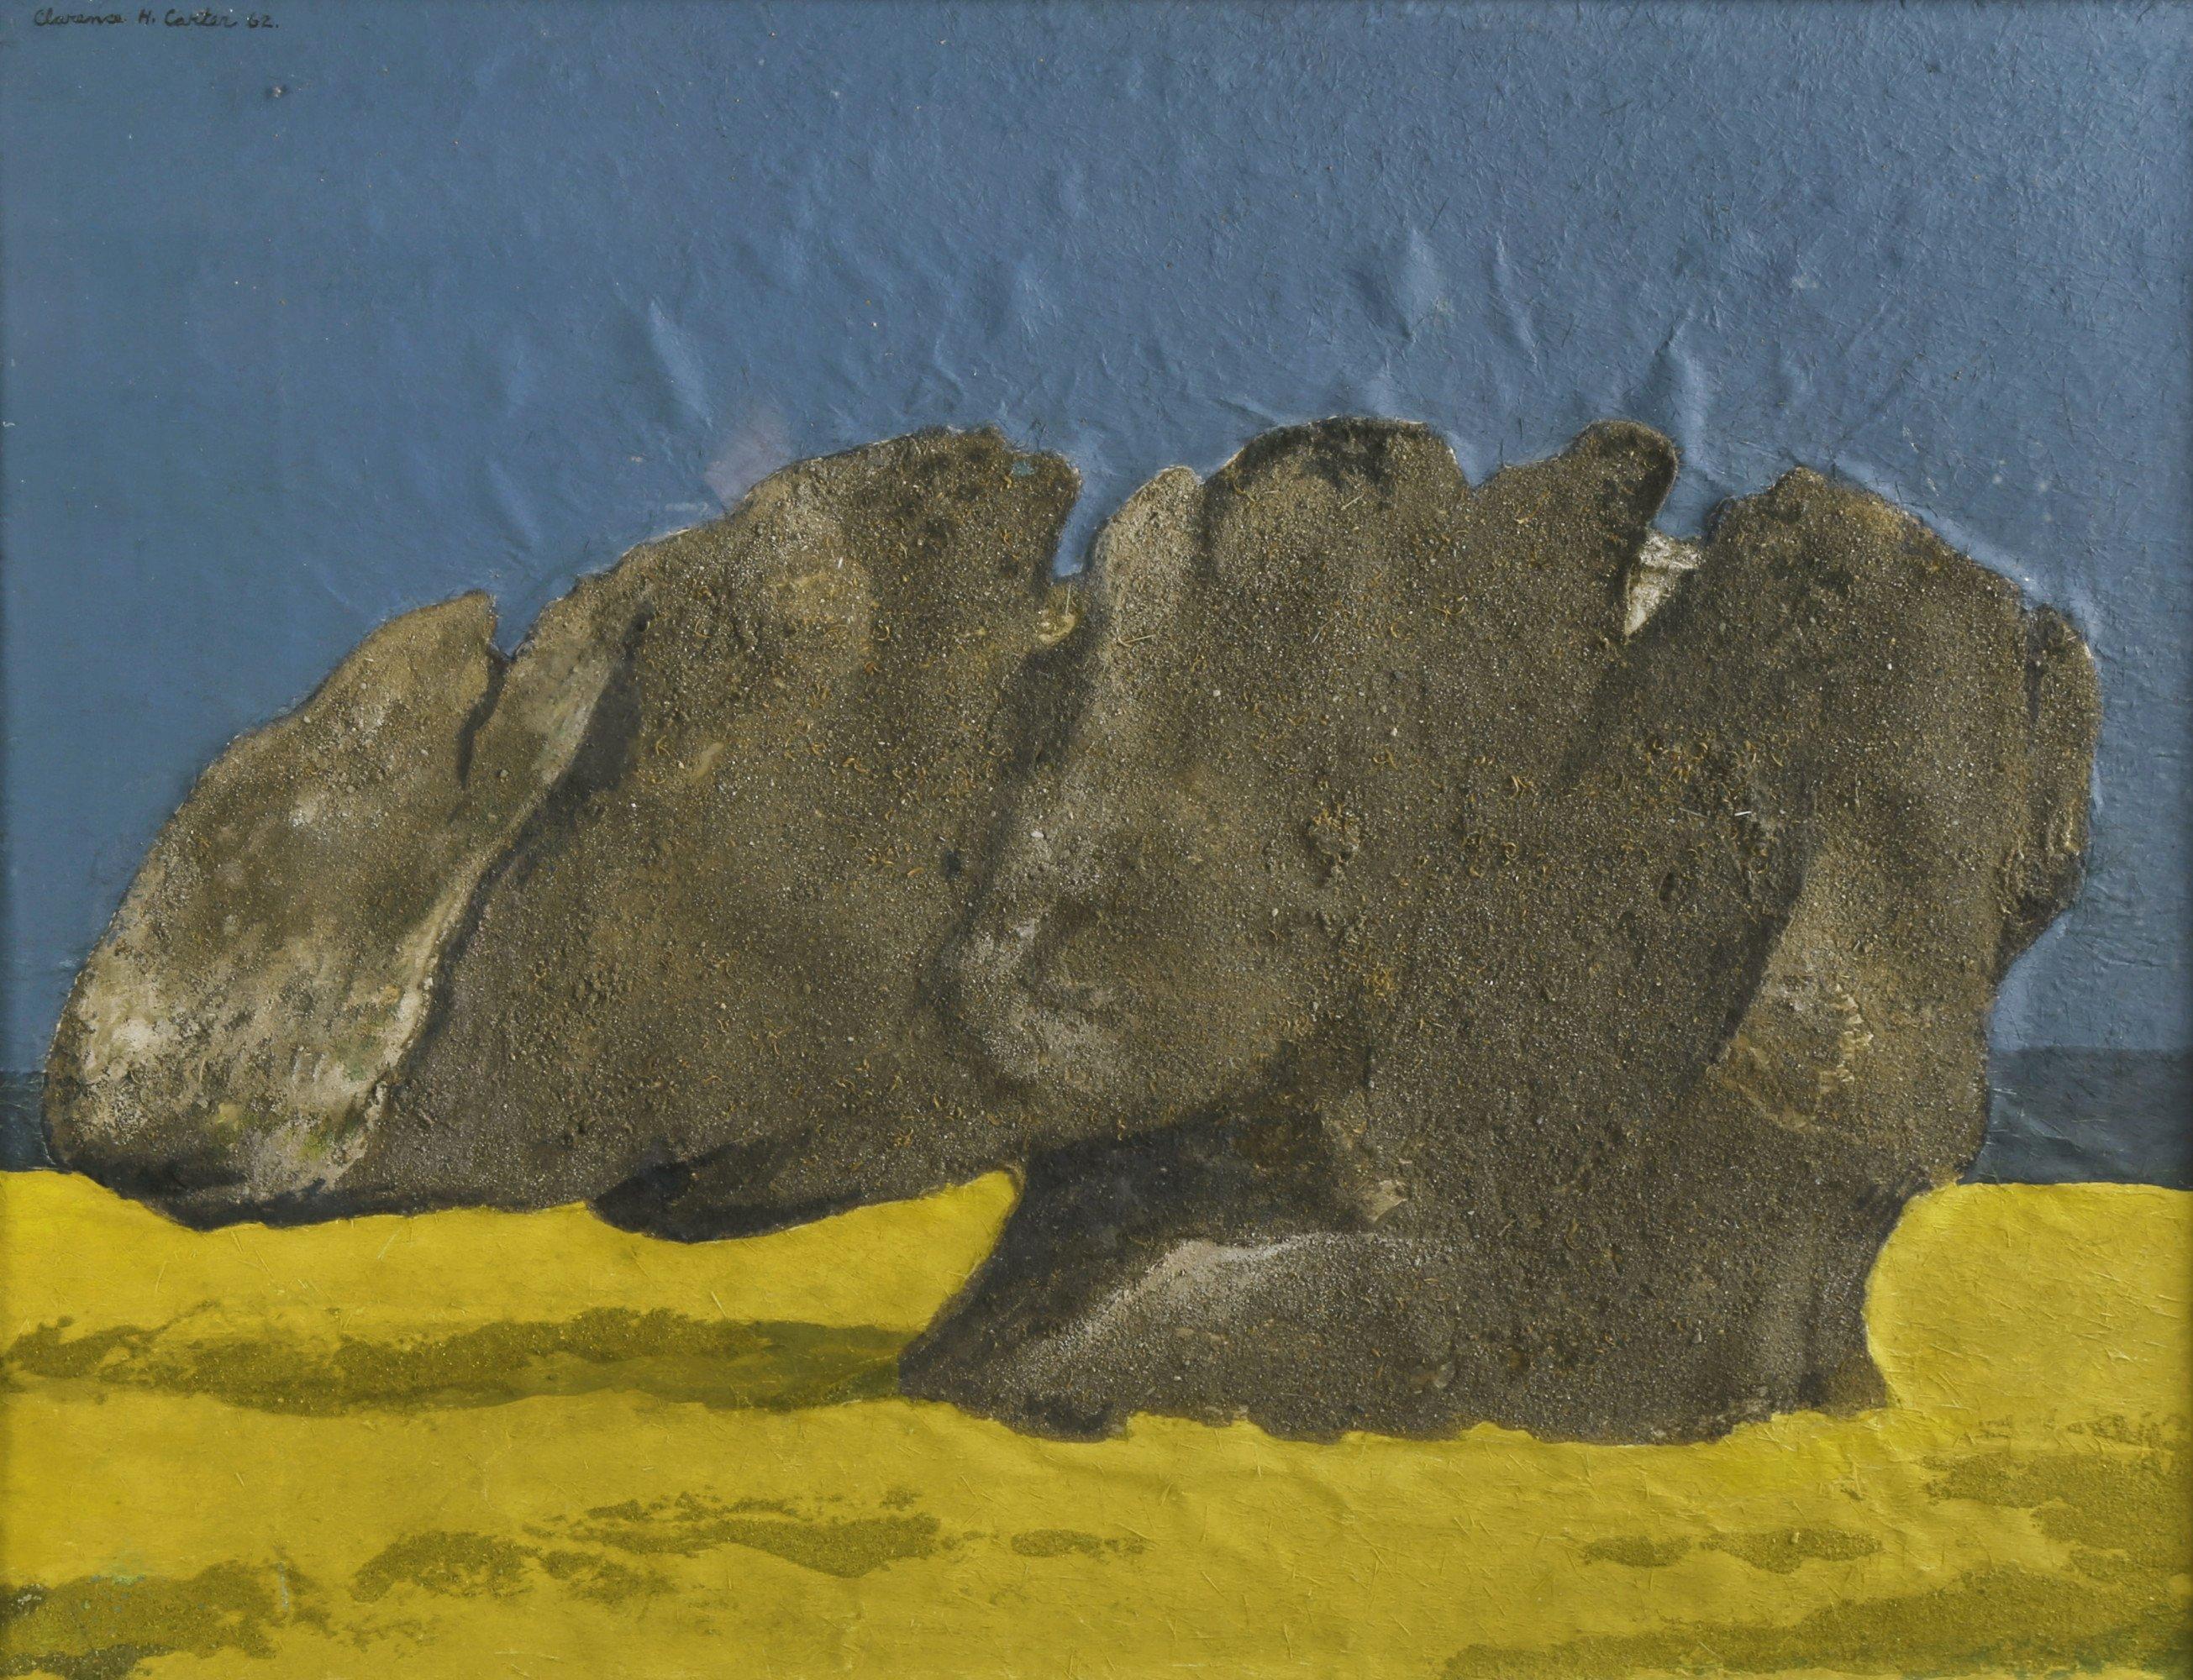 Clarence Holbrook Carter Abstract Painting - Terror of History No. 1, Mid-Century Abstract Acrylic & Sand, Blue and Yellow 